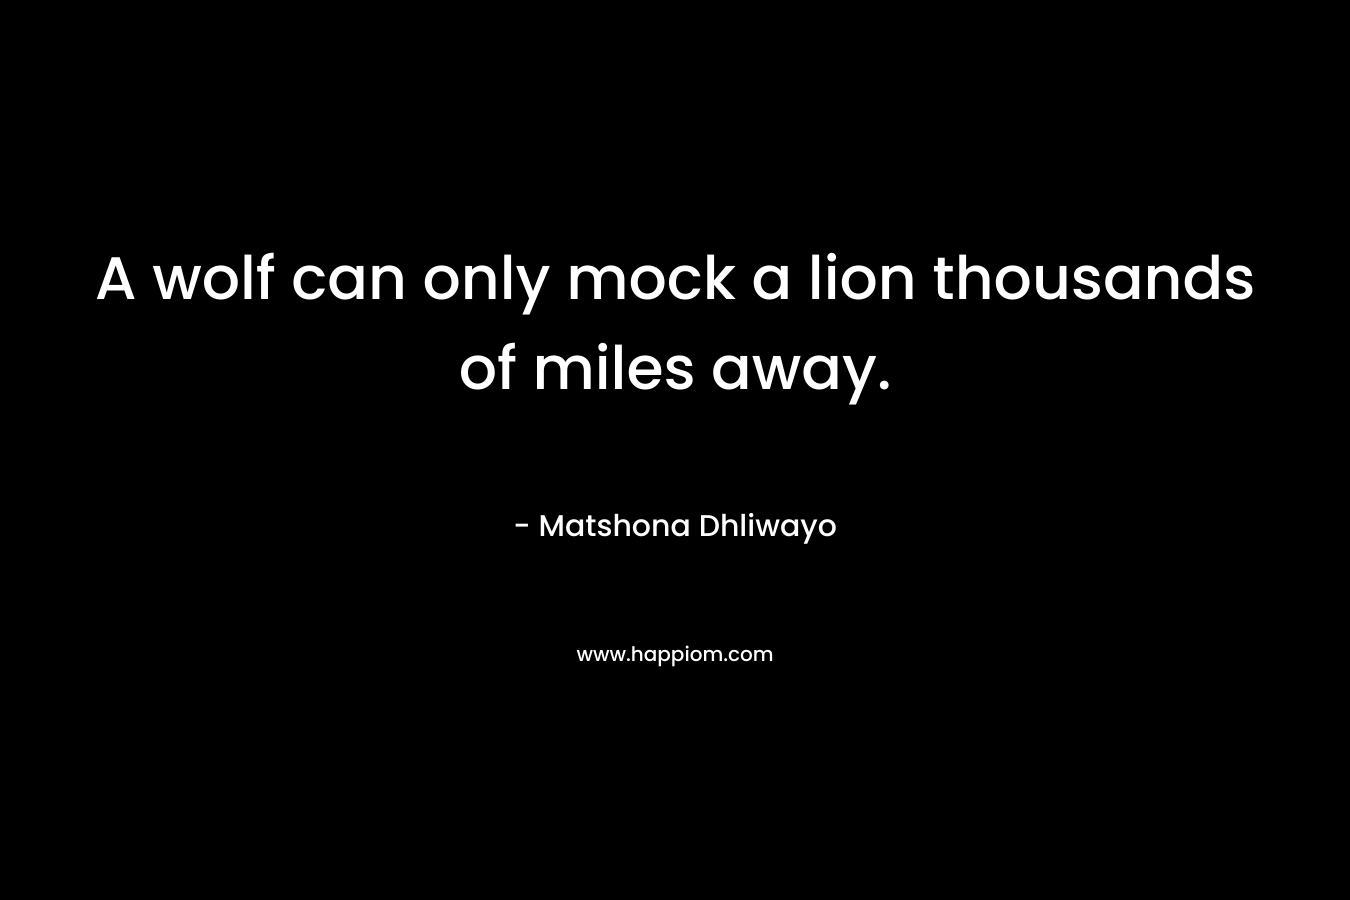 A wolf can only mock a lion thousands of miles away.